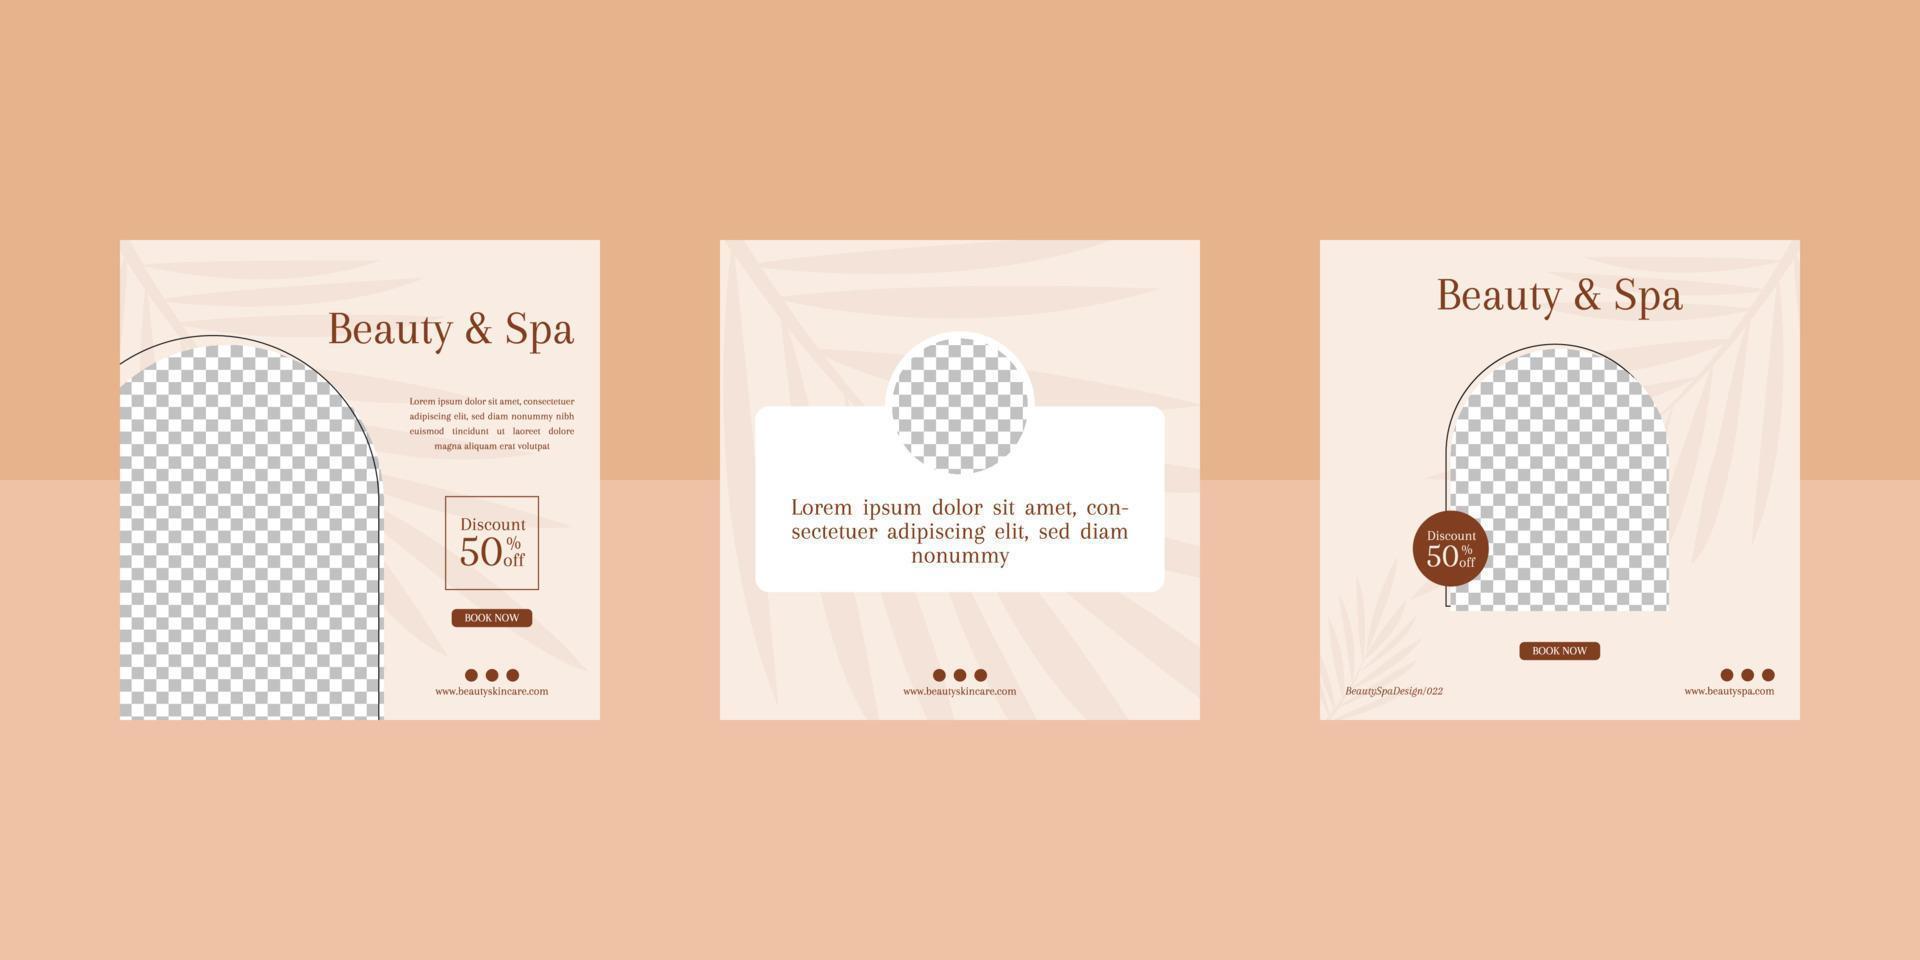 Beauty and spa social media post template vector